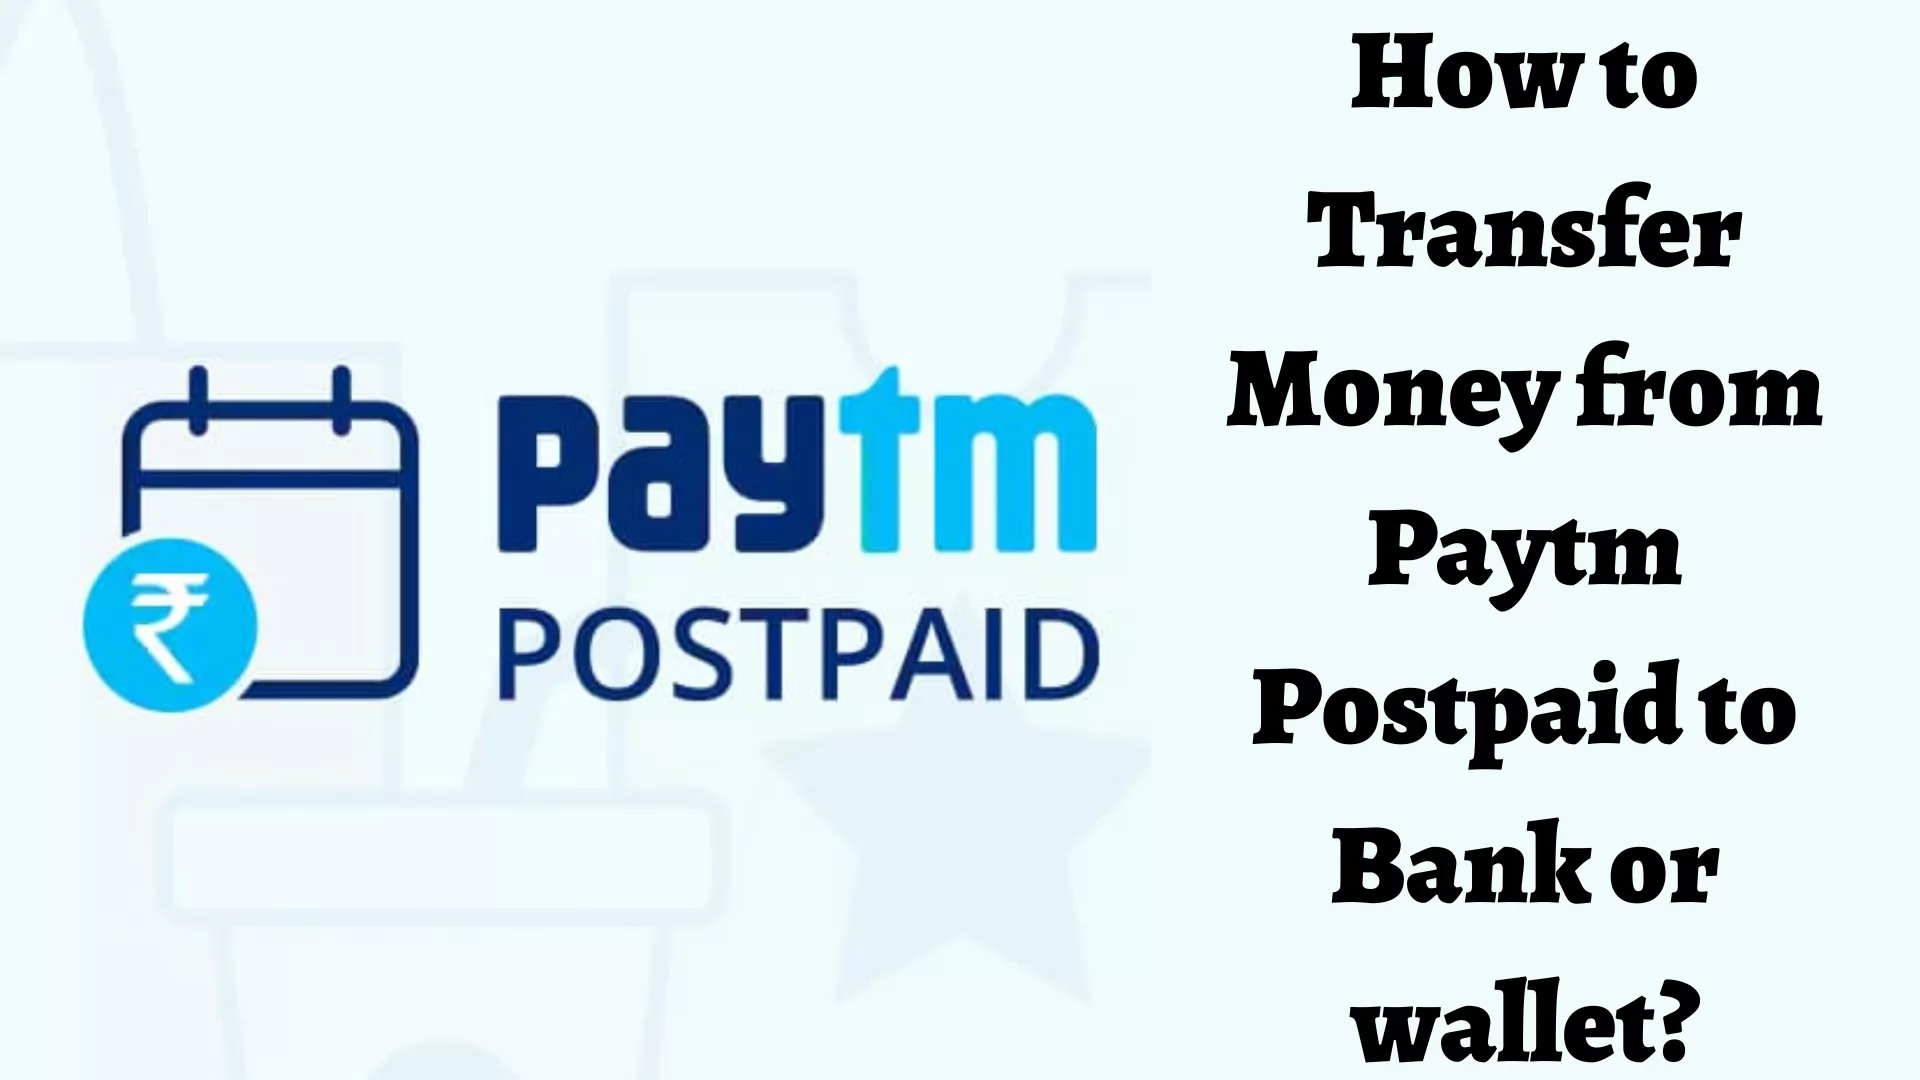 How to Transfer Money from Paytm Postpaid to Bank or wallet?